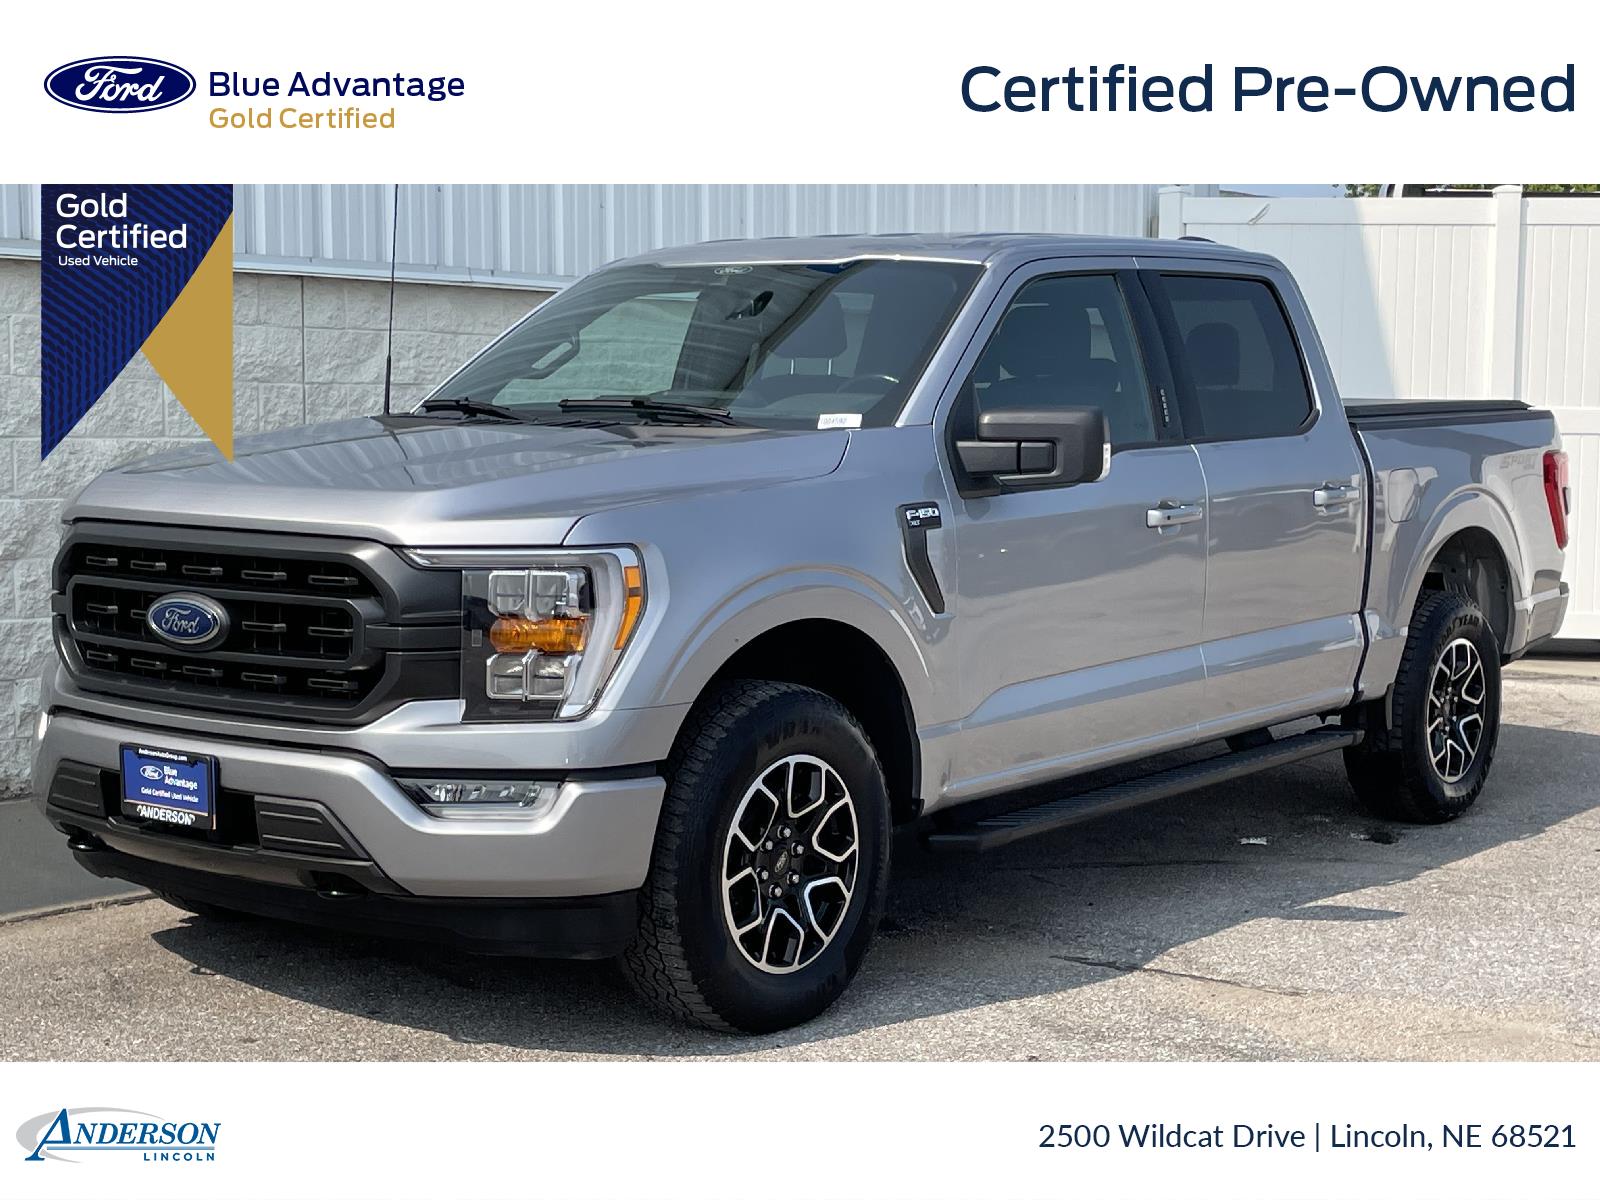 Used 2021 Ford F-150 XLT Crew Cab Truck for sale in Lincoln NE